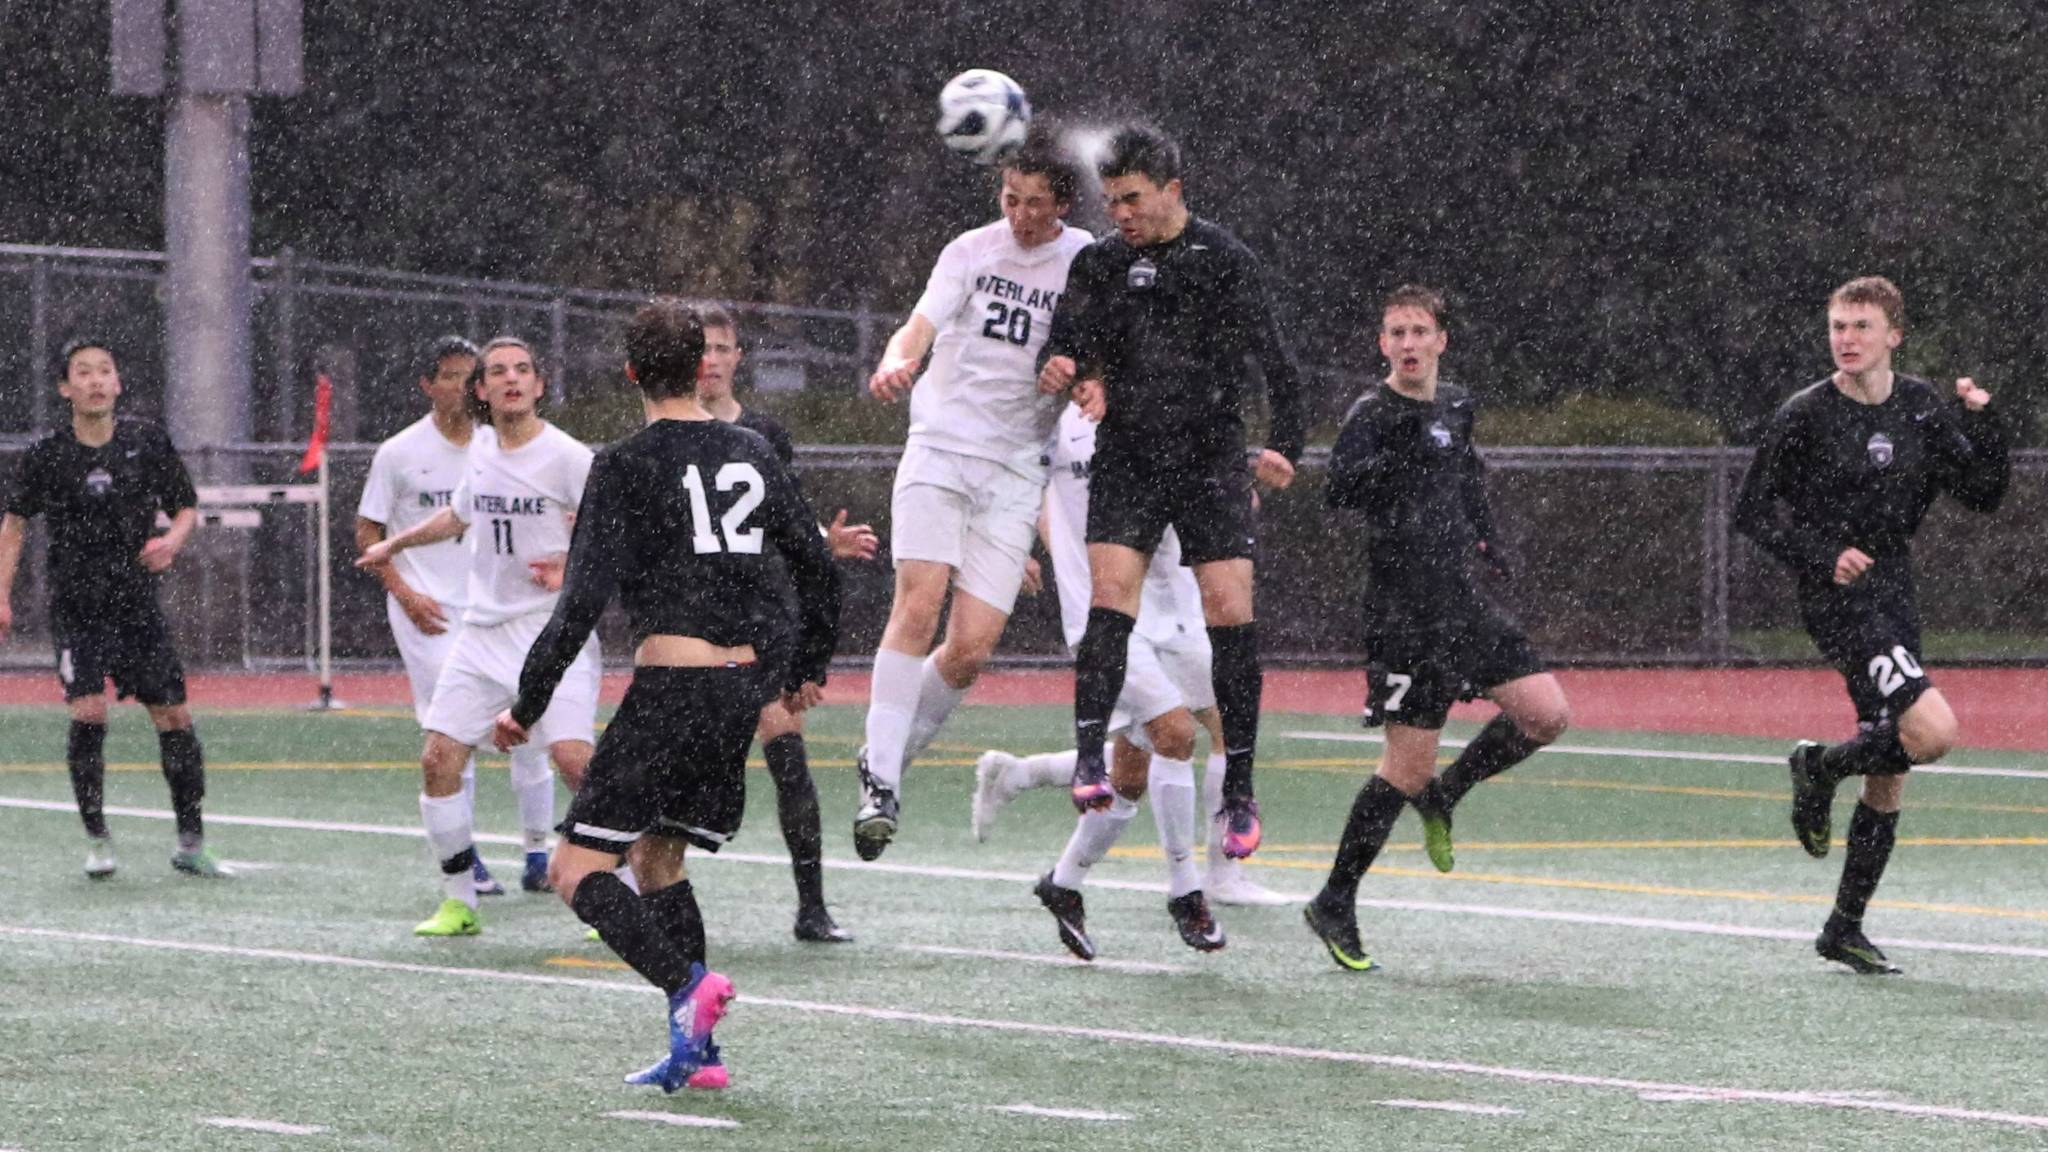 Lake Washington’s Edgar Iniguez (third from right) goes up for a header in the rain against Interlake. Courtesy of Doug Lewis